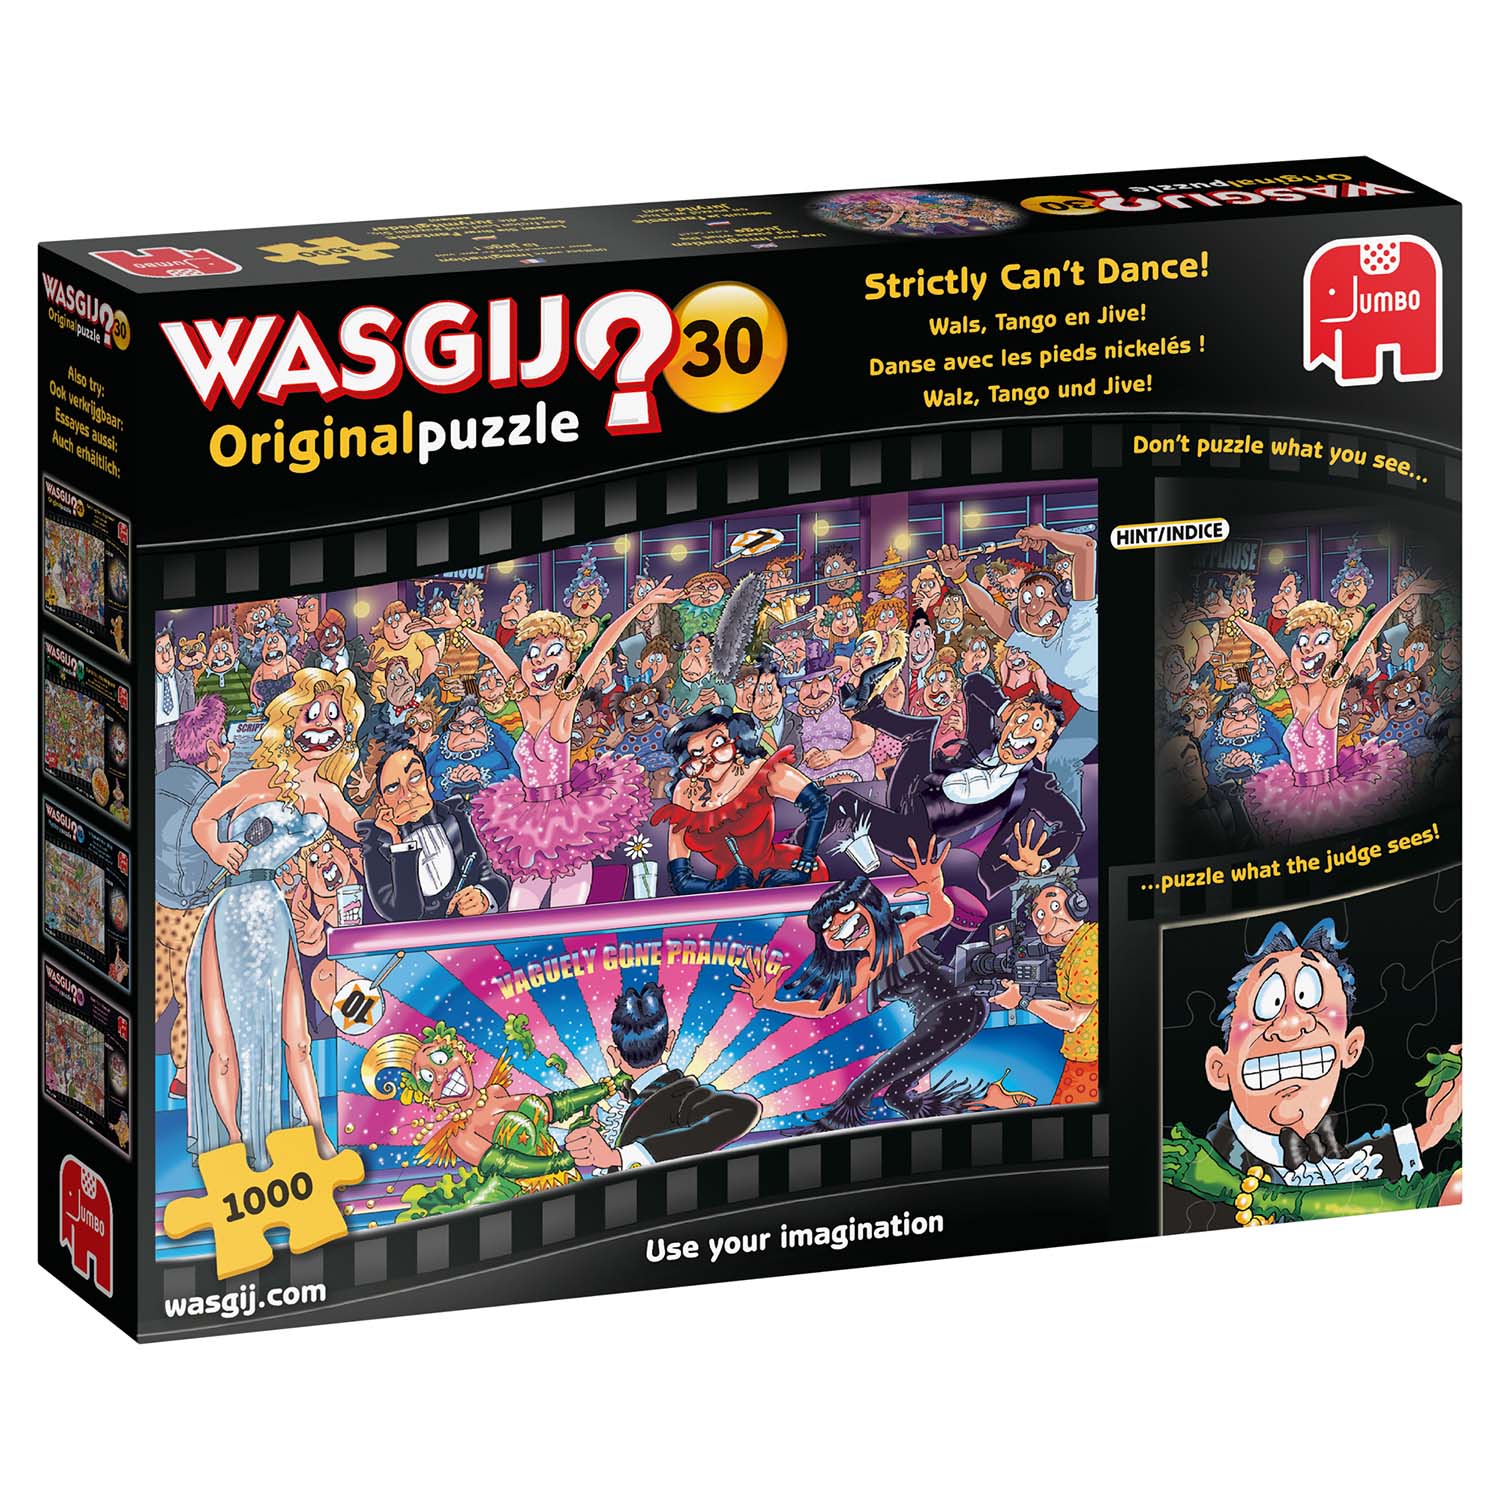 Wasgij Original 30: Strictly Can't Dance